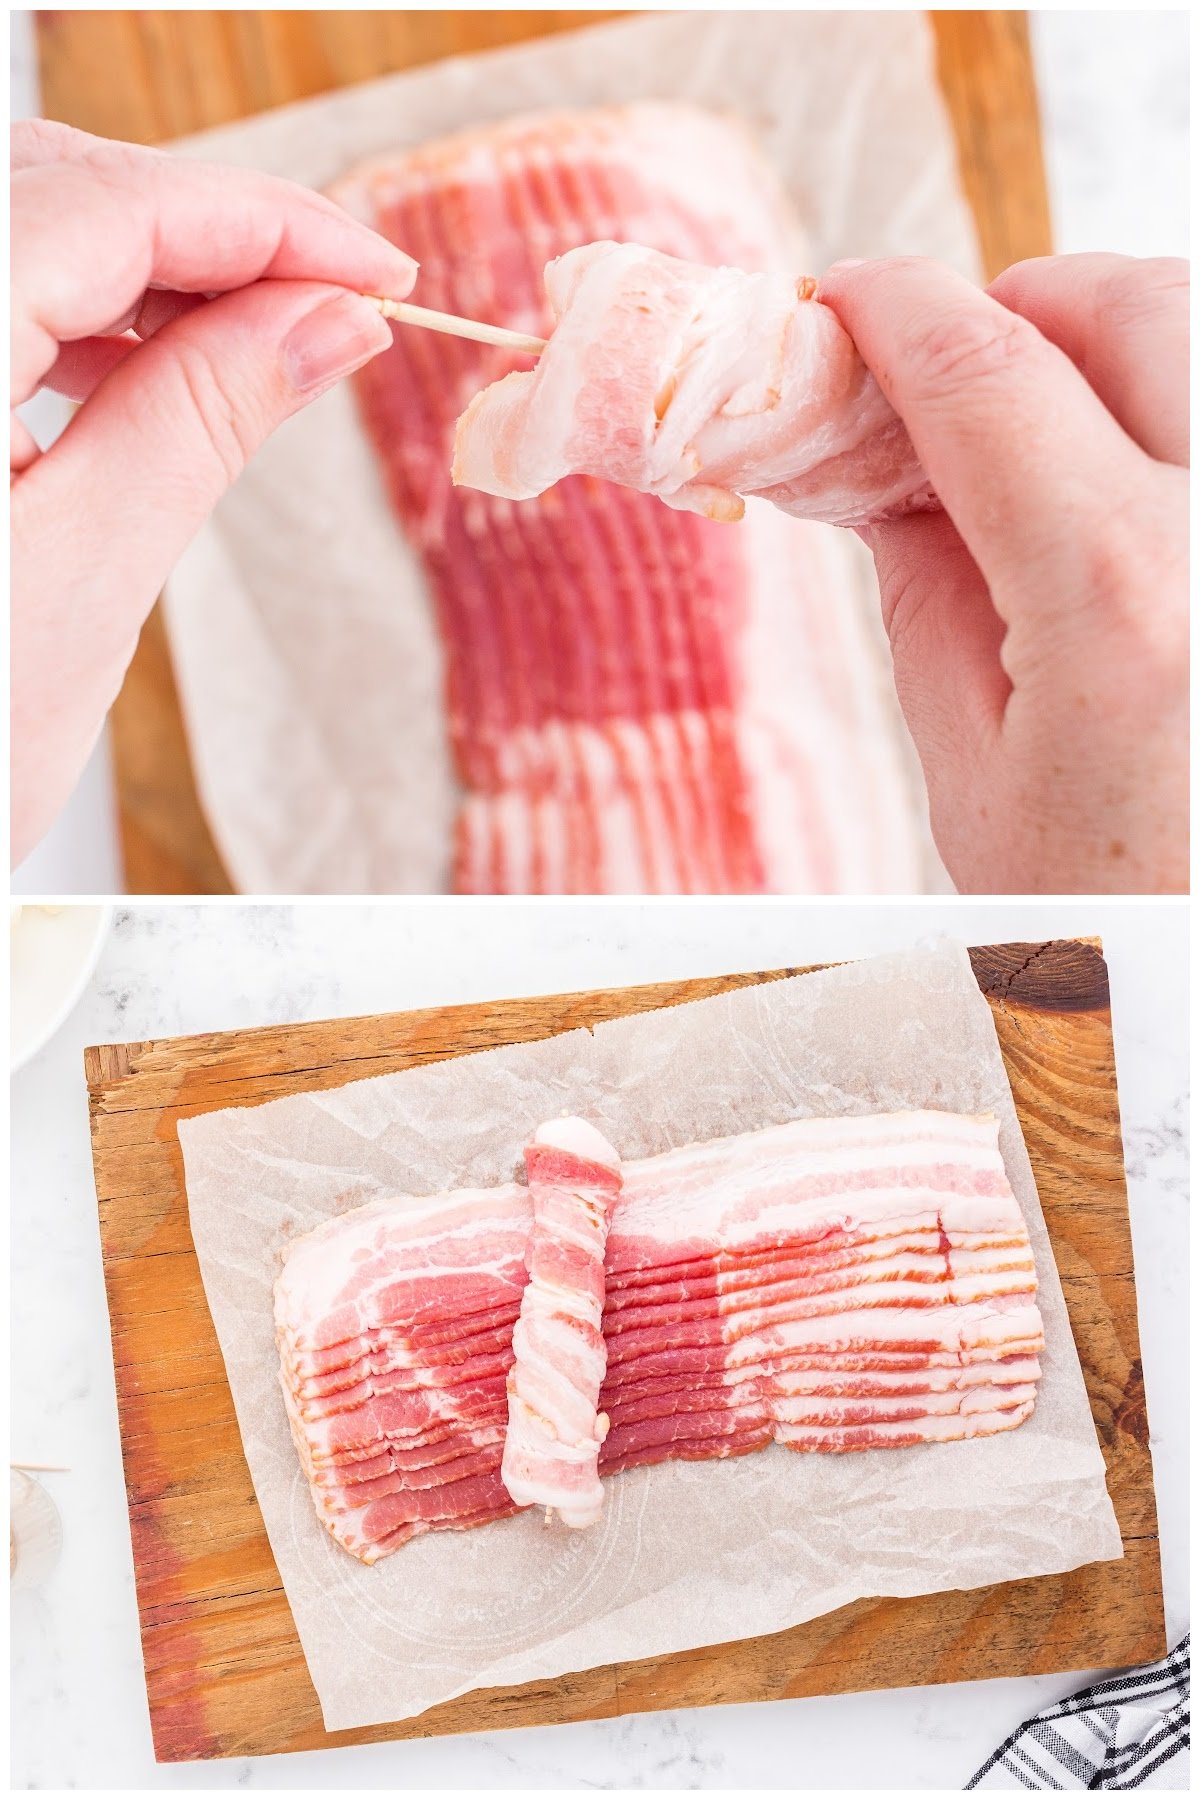 Wrapped the mozzarella cheese in strips of bacon, securing with a toothpick.